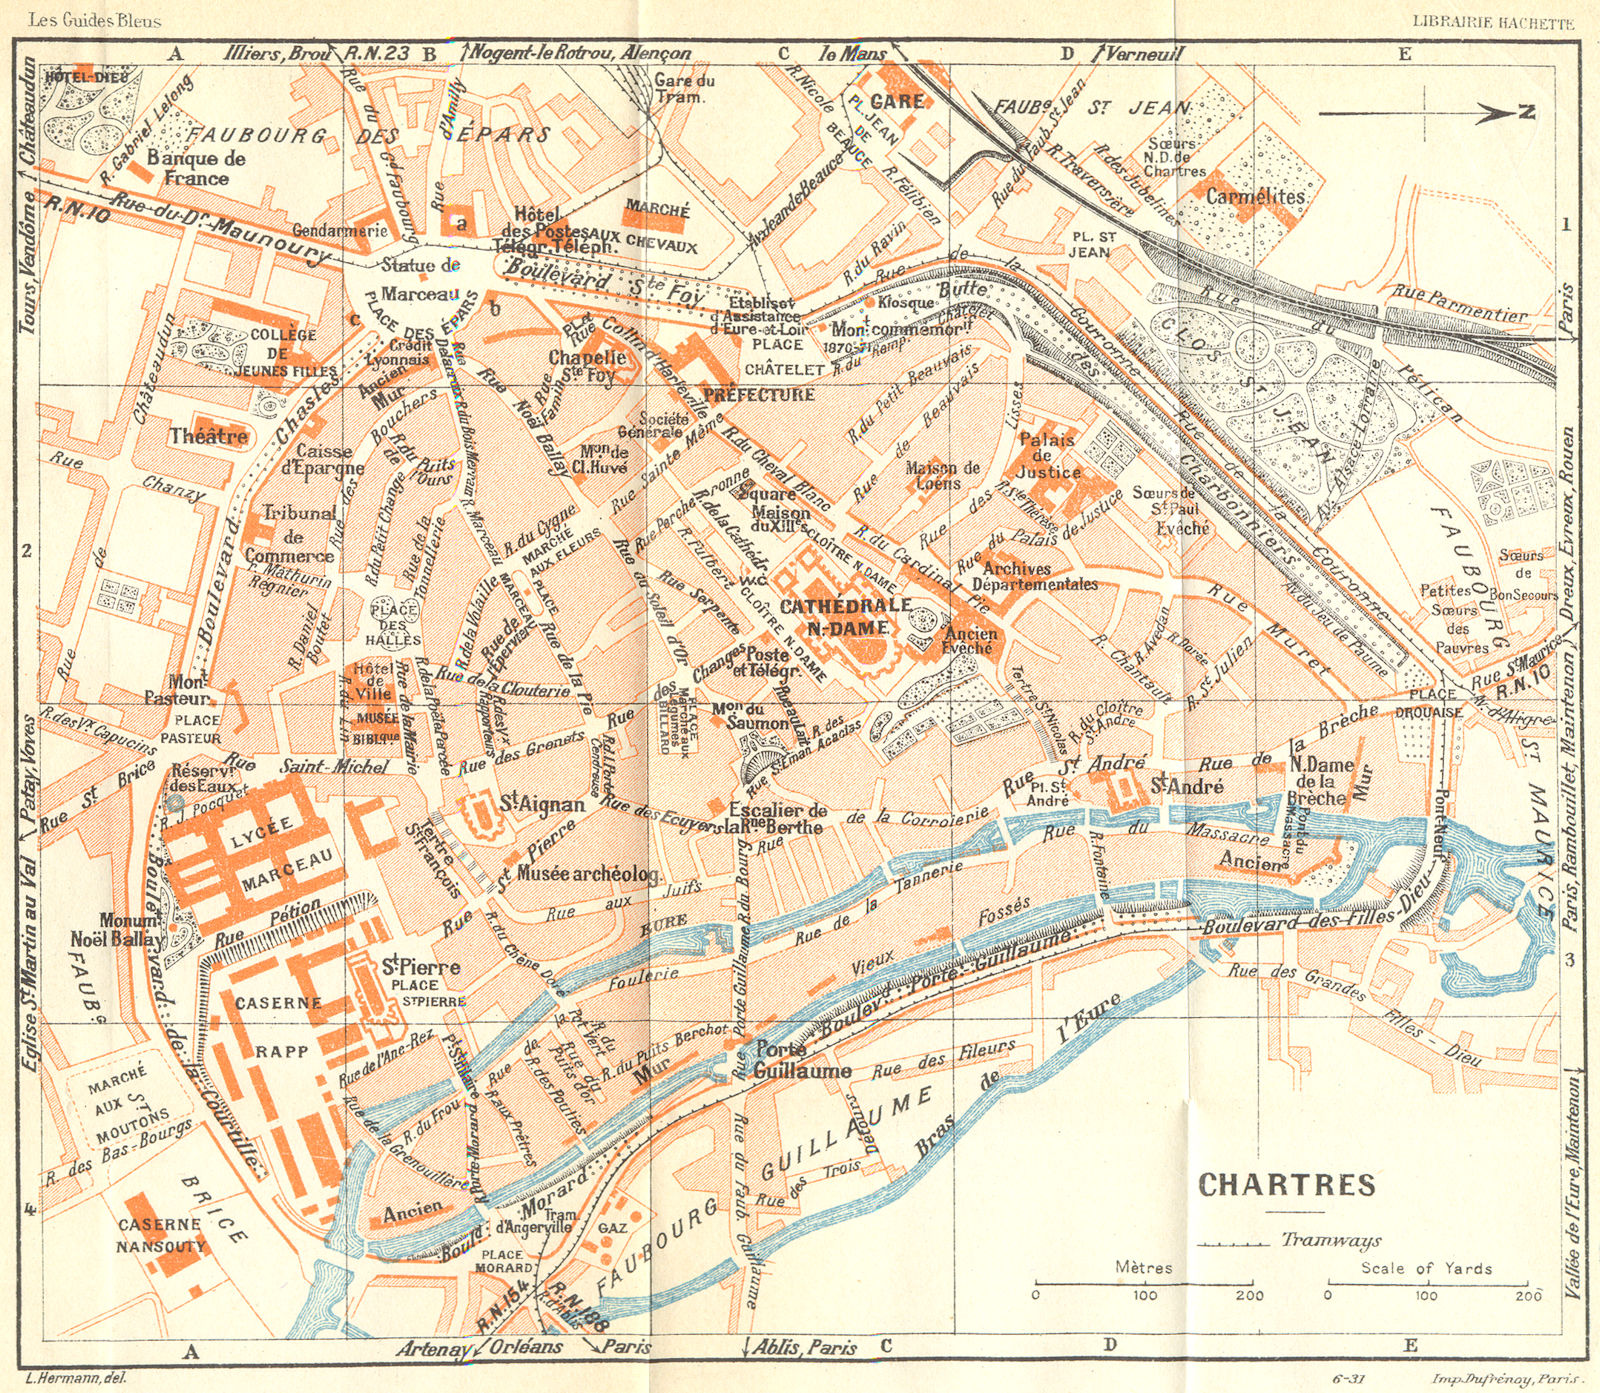 FRANCE. Chartres 1932 old vintage map plan